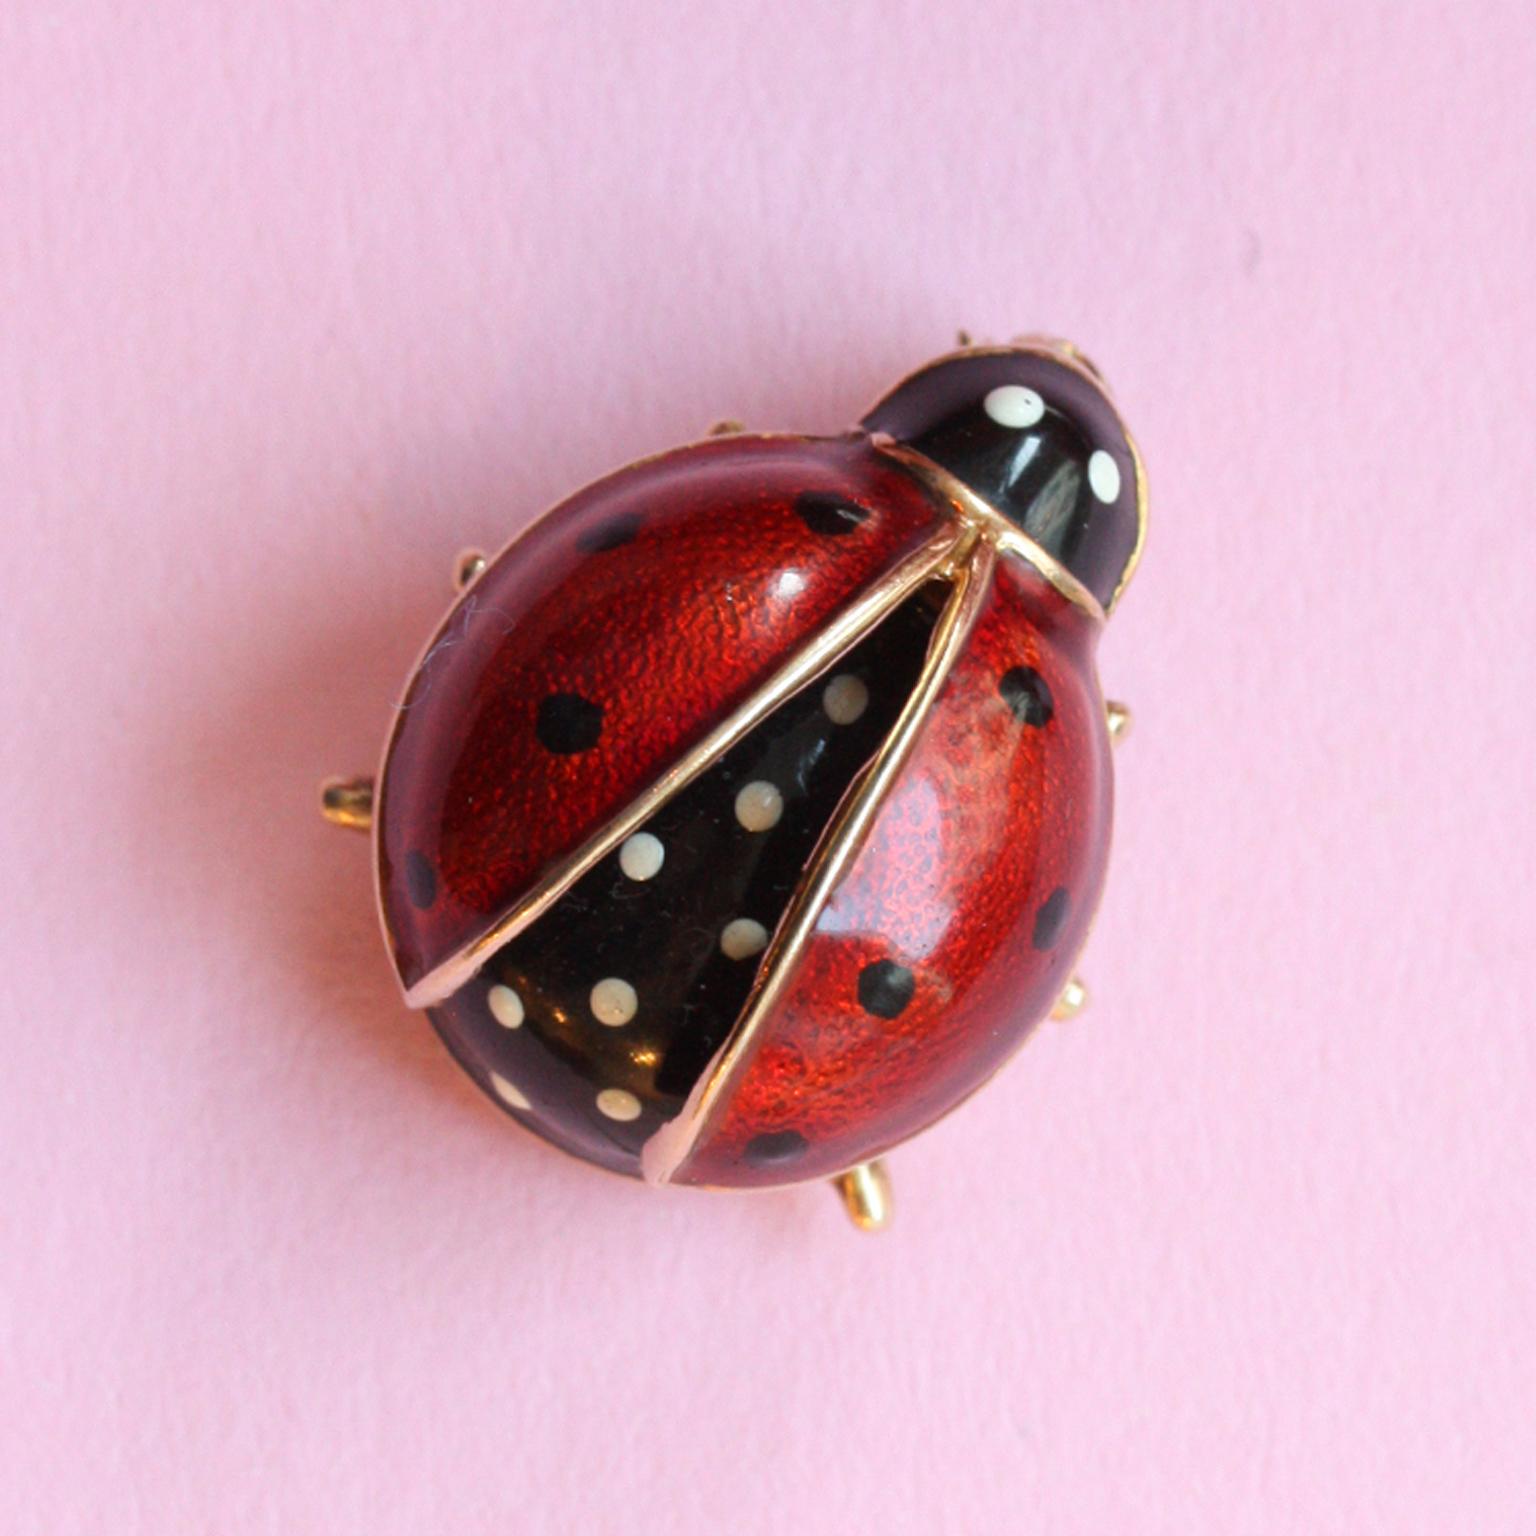 A 14 carat gold brooch in the shape of a ladybird with black and white and red transparant enamel.

weight: 4.3 grams
dimensions: 2 x 1.5 x 1 cm